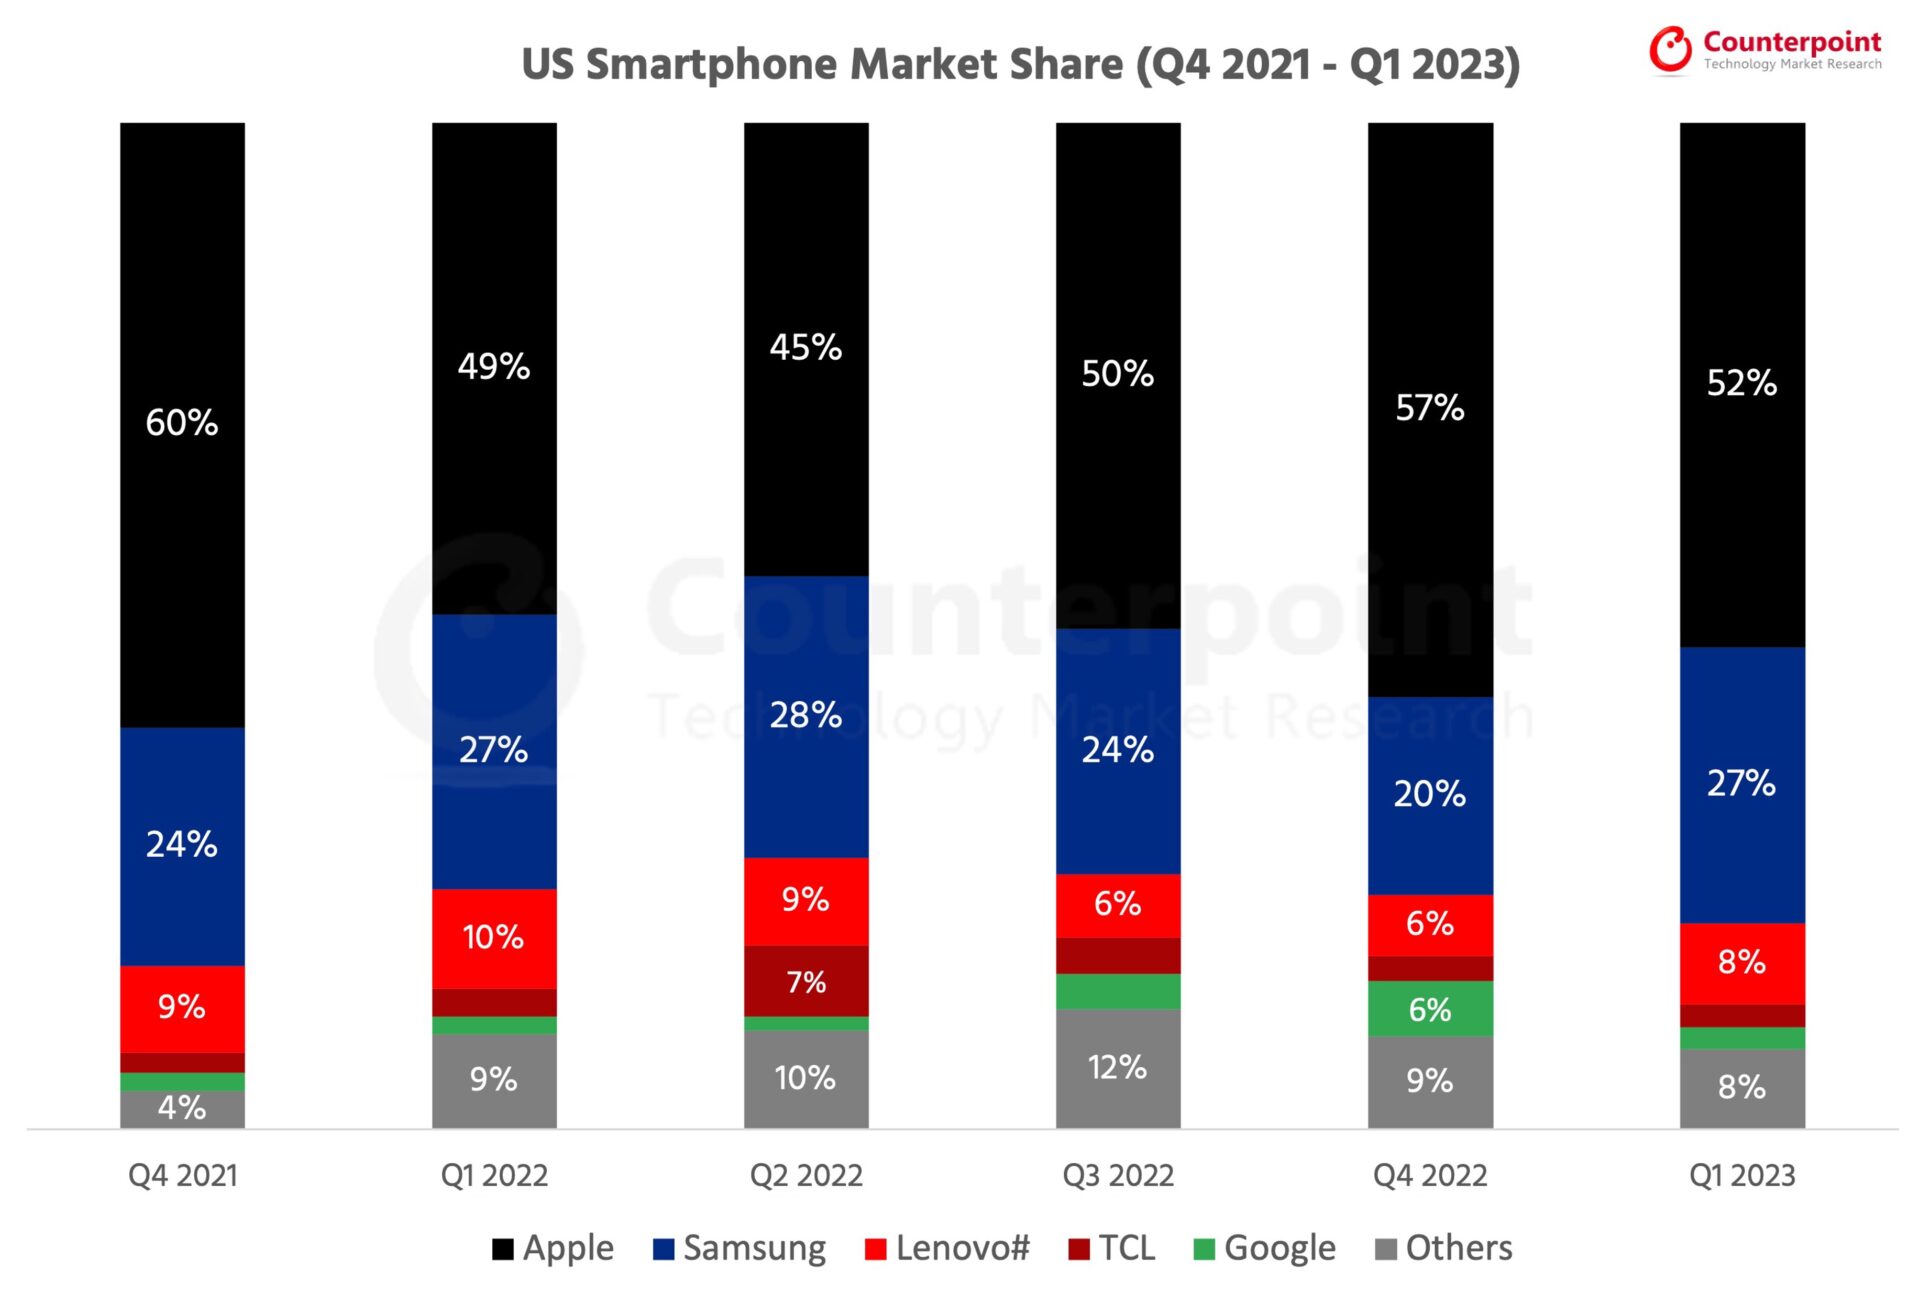 US Smartphone Market Share Quarterly Counterpoint